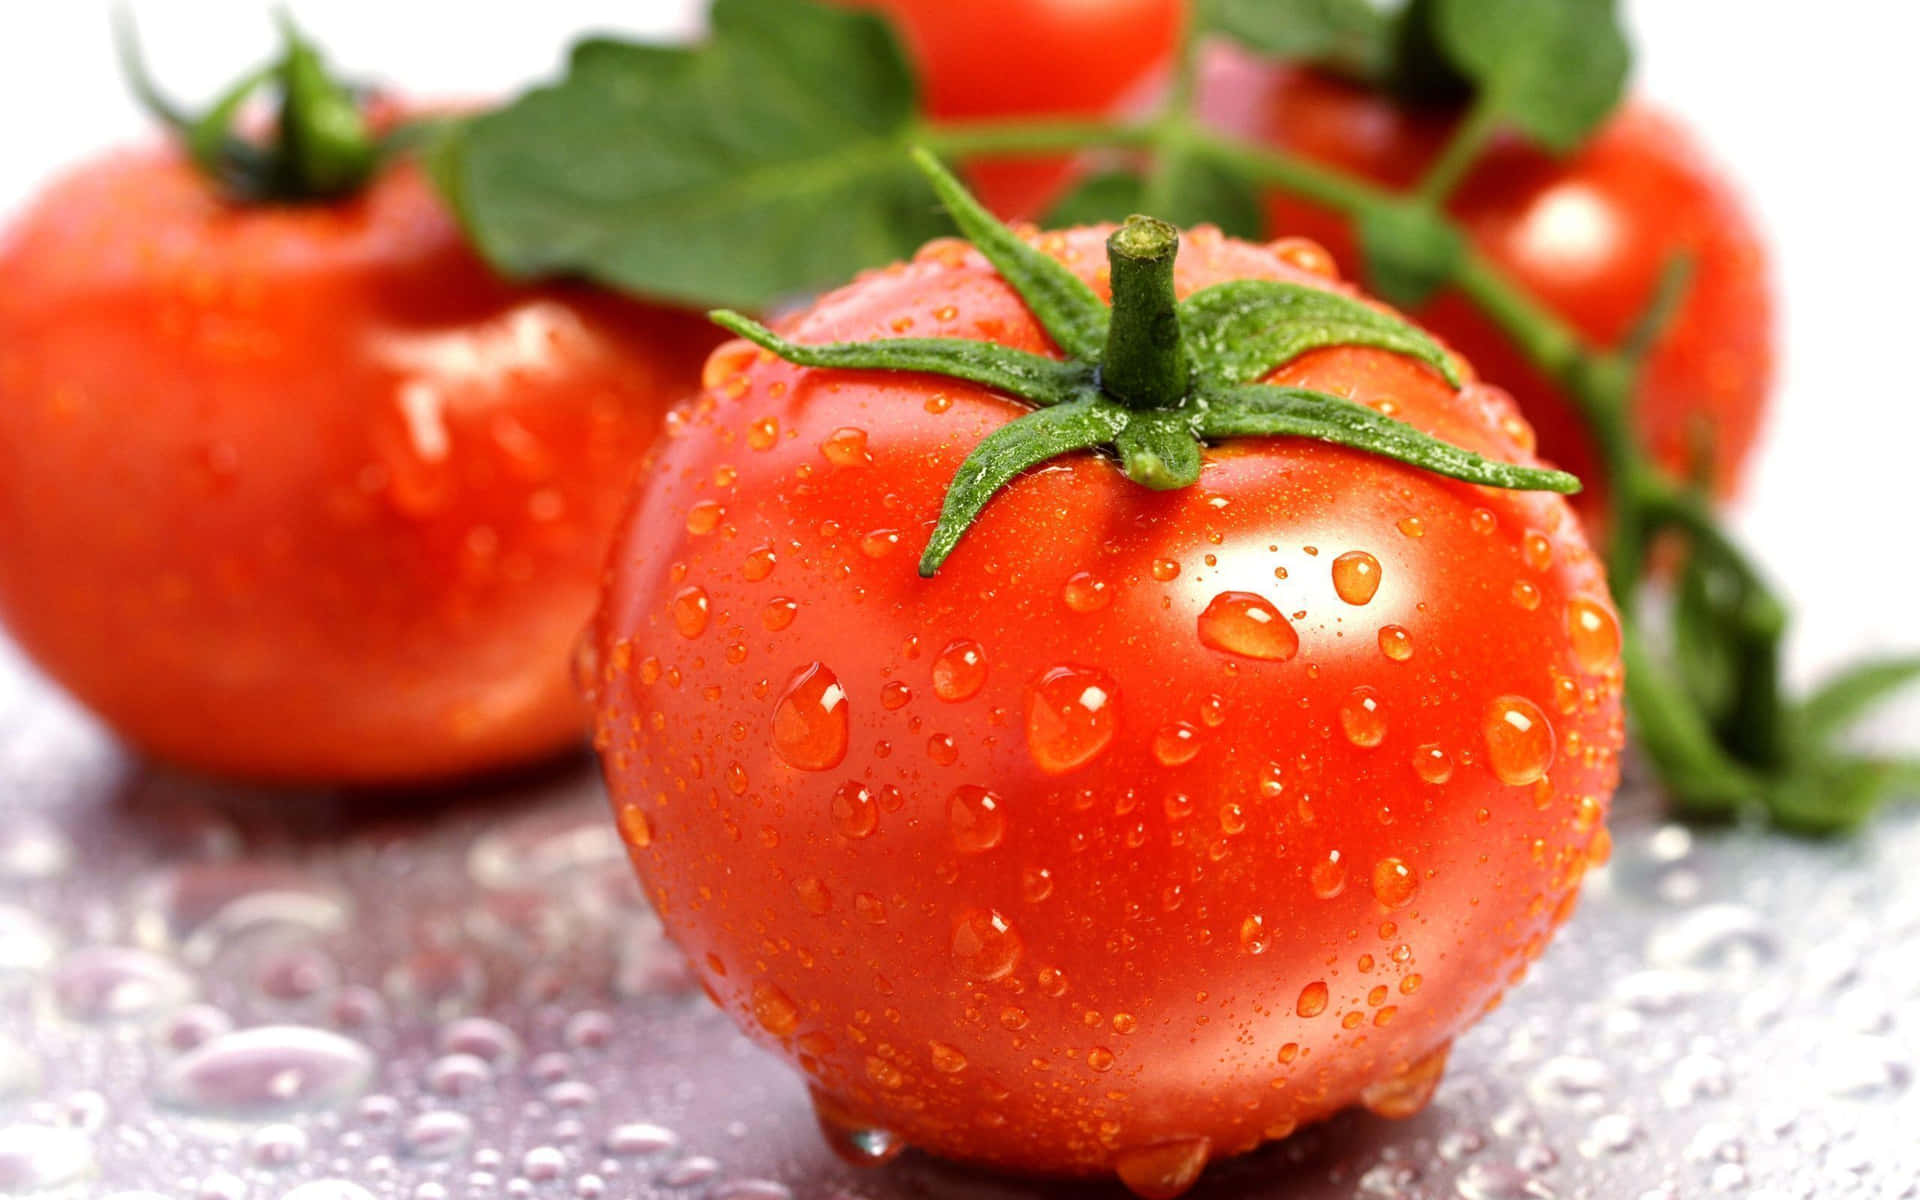 A freshly picked tomato, perfect for making salsa and sauces.